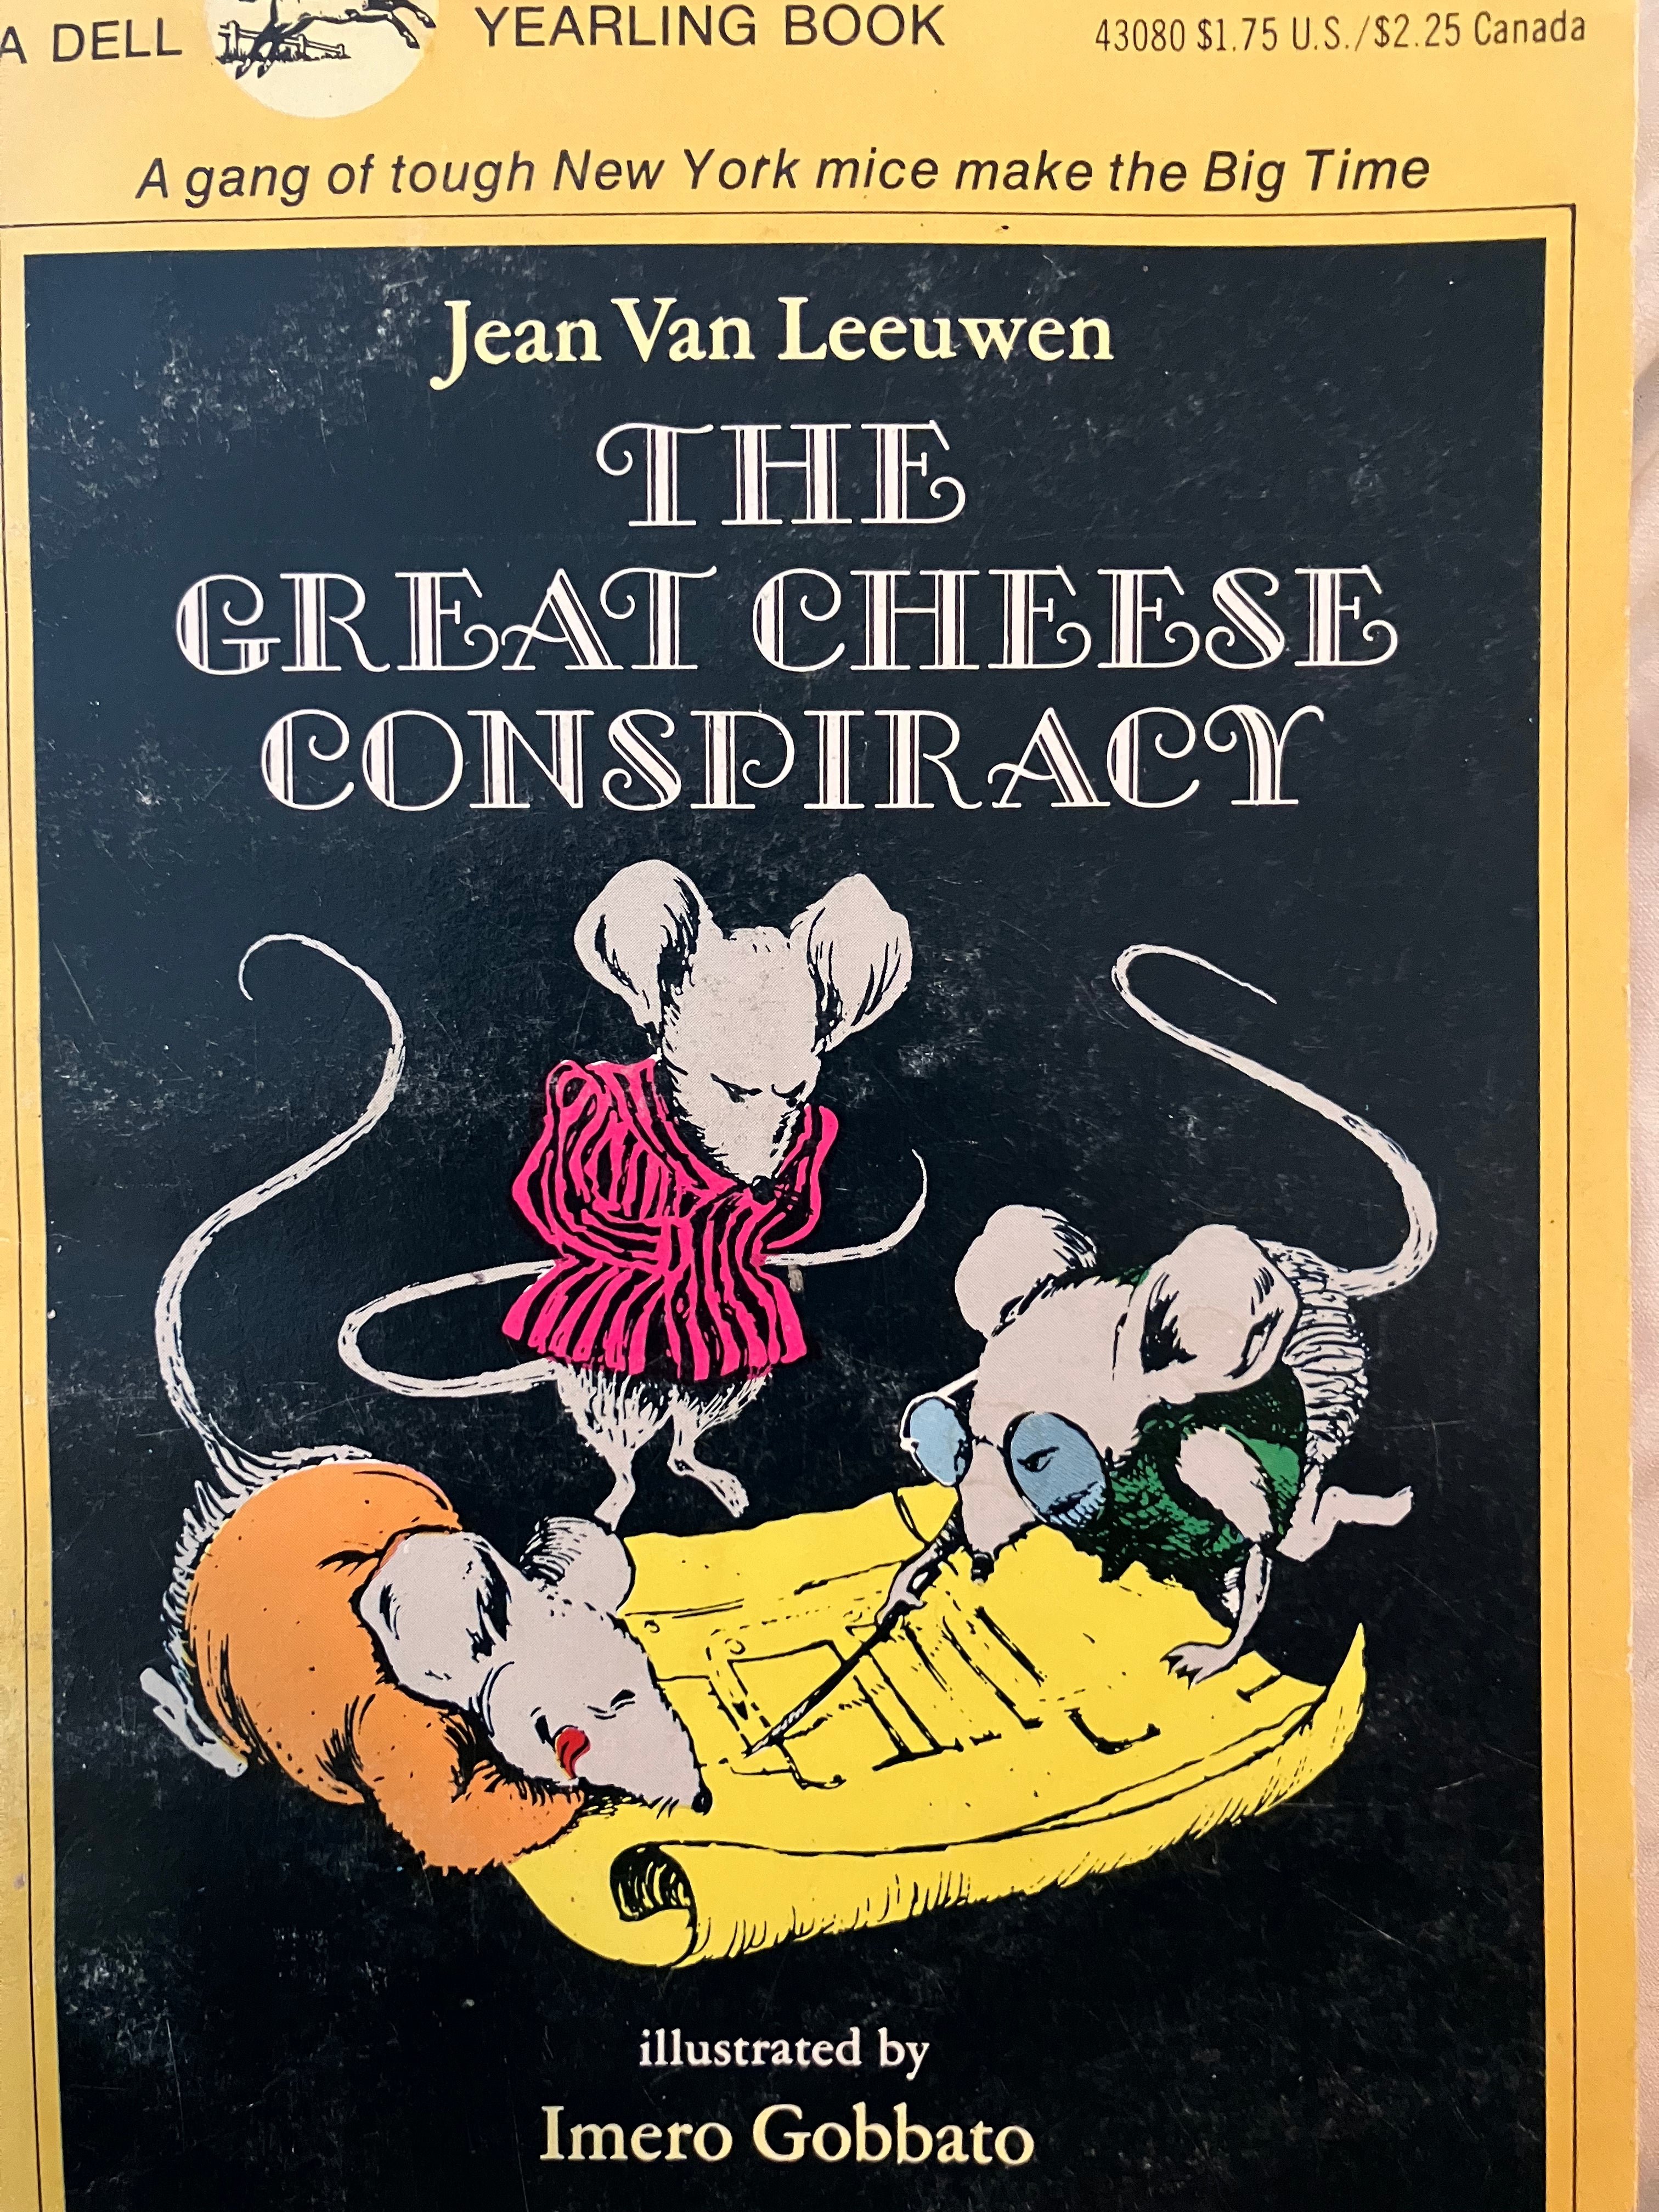 The Great Cheese Conspiracy book